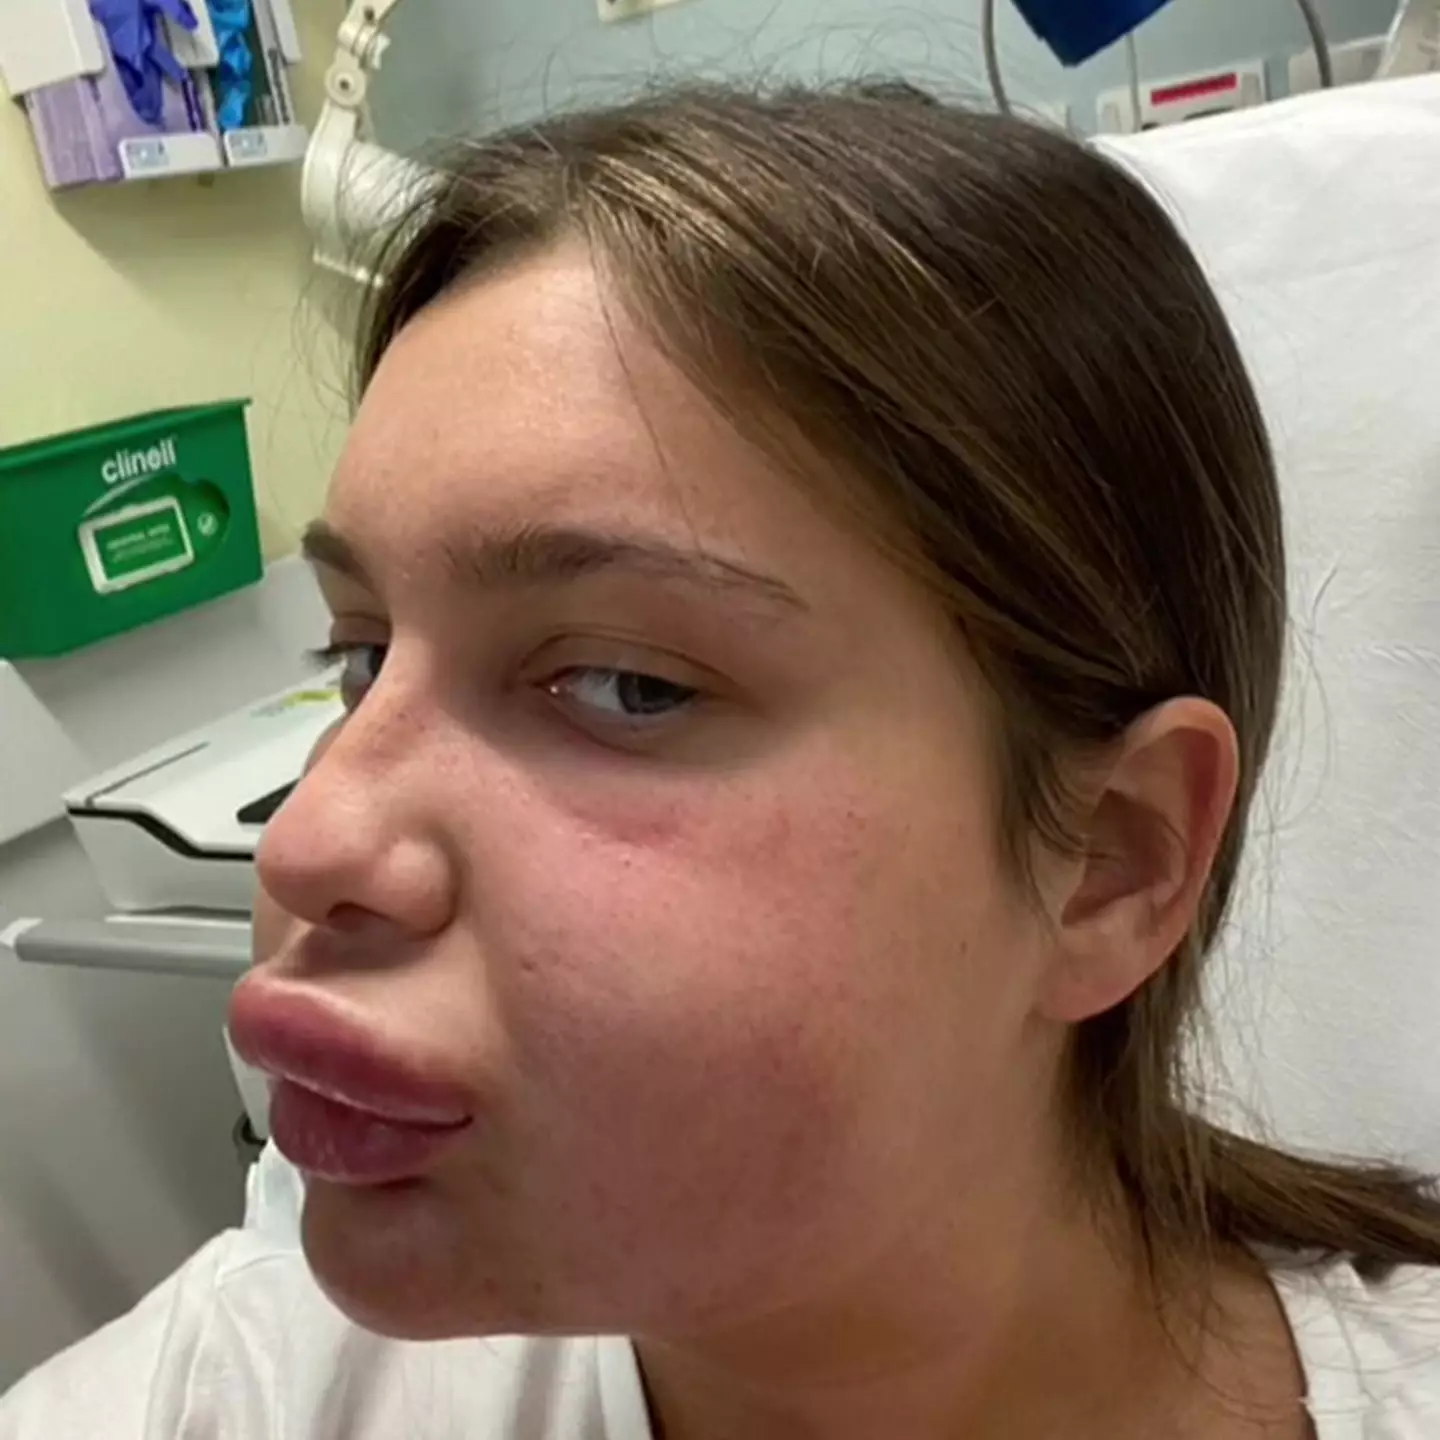 "I had my lip filler dissolved....and ended up in hospital."